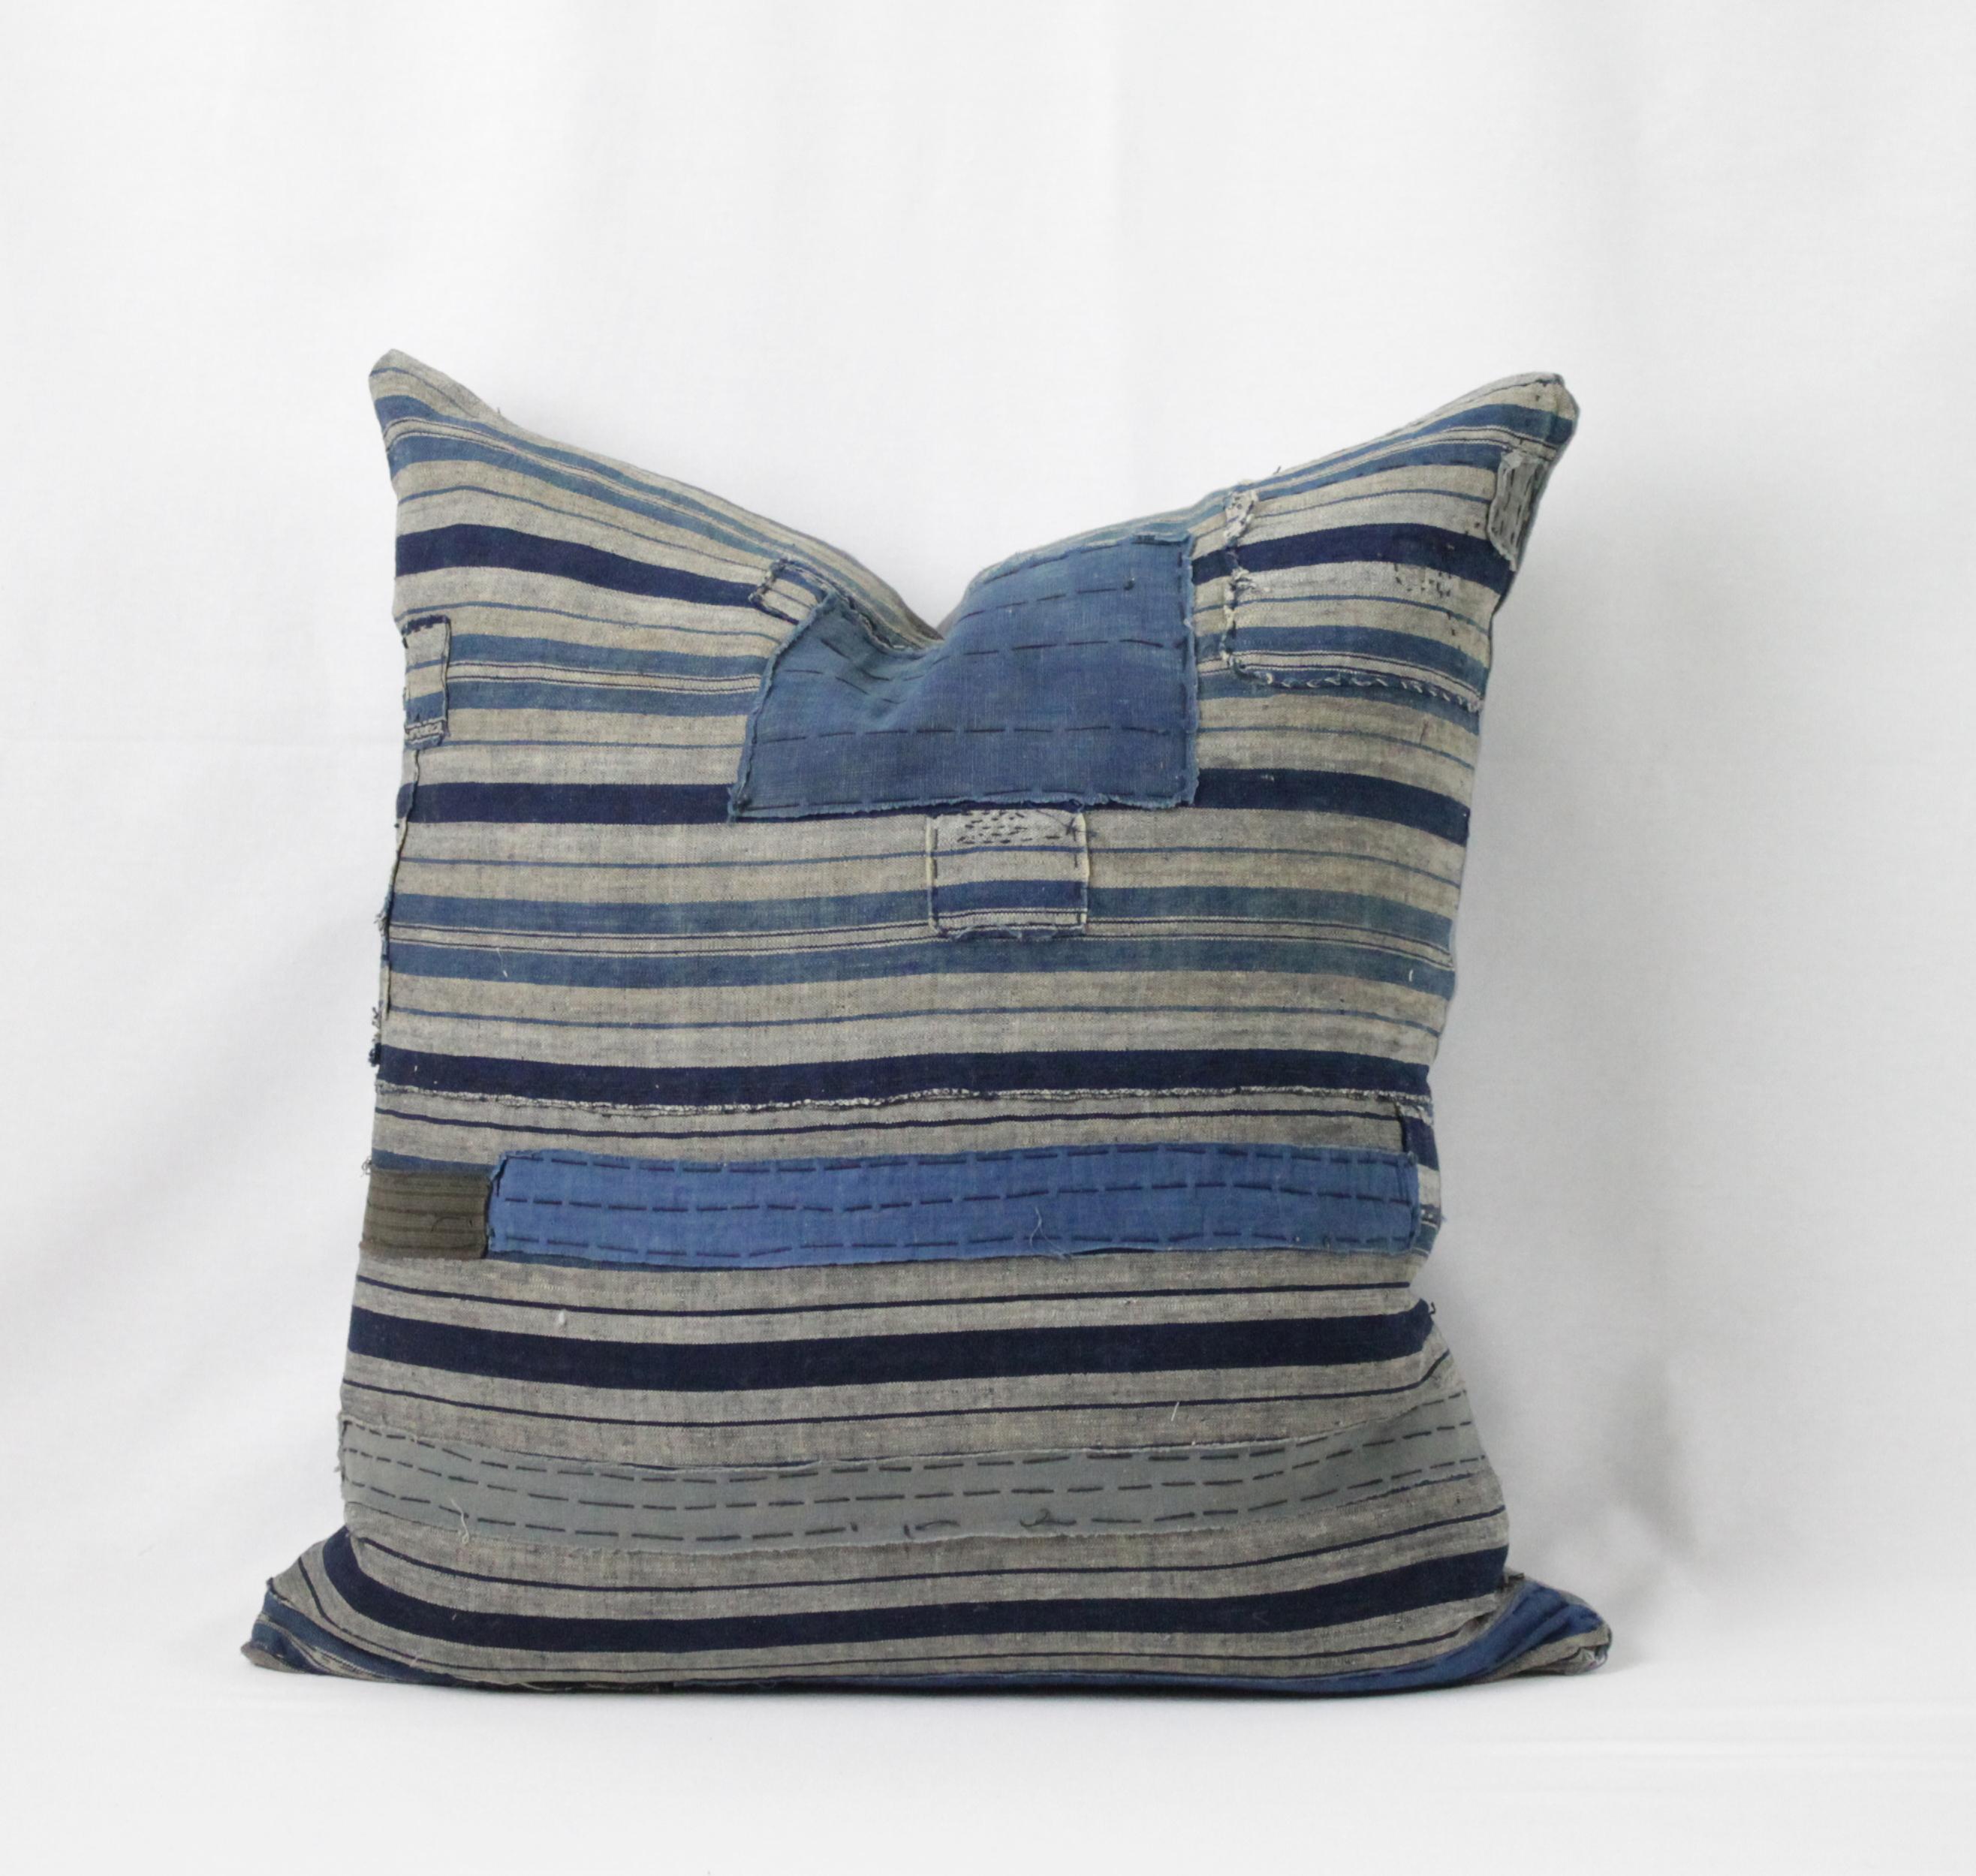 Blue patchwork horizontal style pillow, with zipper closure. Back is in grey linen. Main colors are medium blue, indigo blue, light blue color, tan, with black thread running through the design. Does not include insert. Measures 22